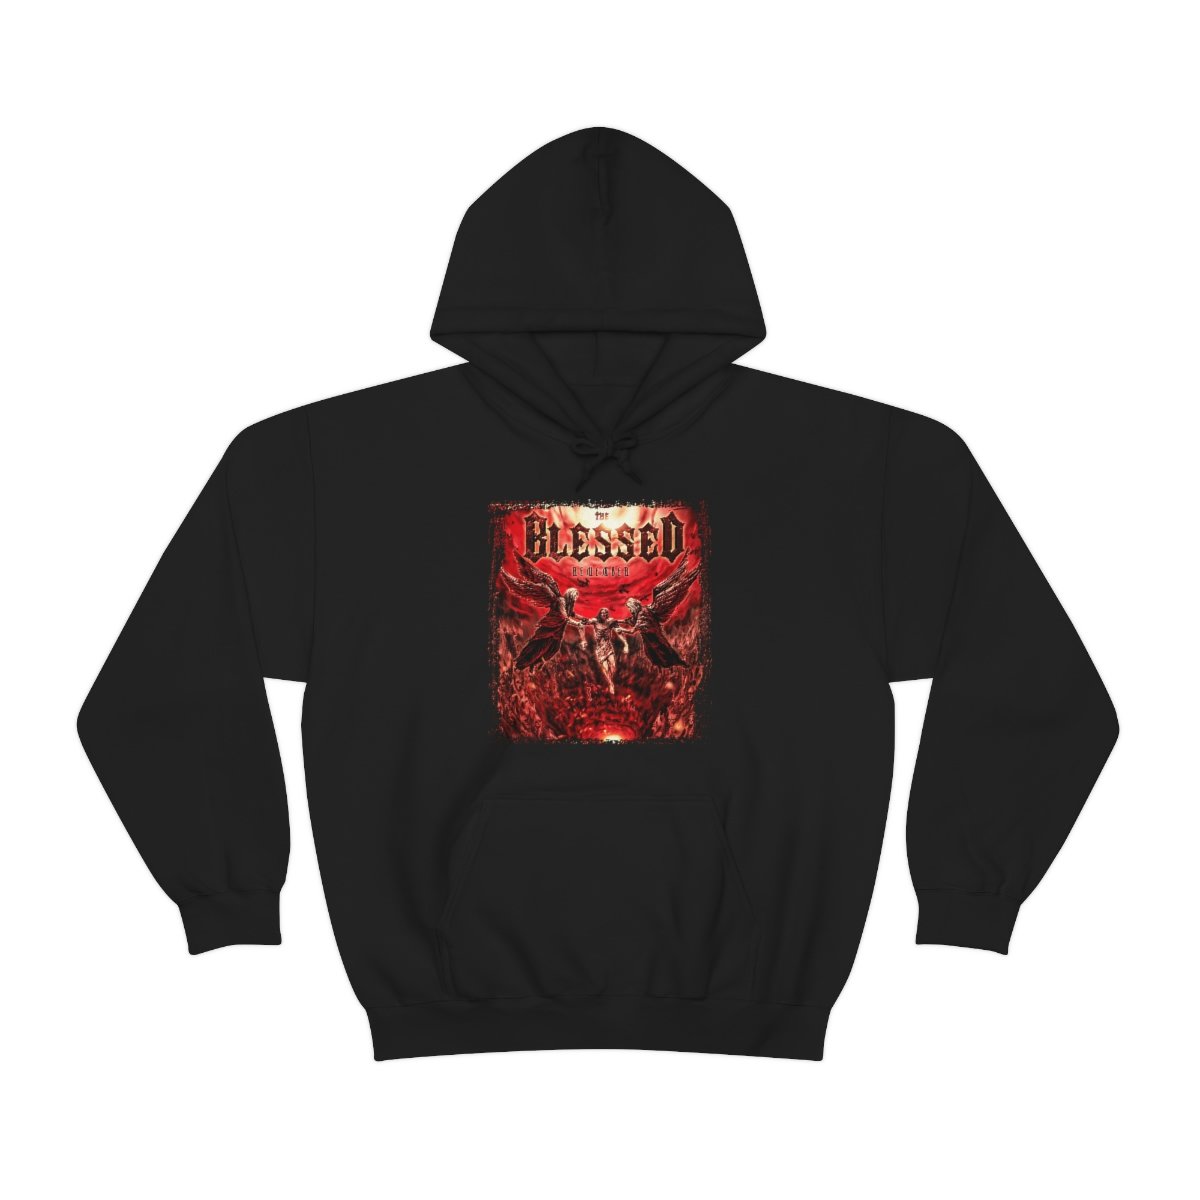 The Blessed – Remember Pullover Hooded Sweatshirt